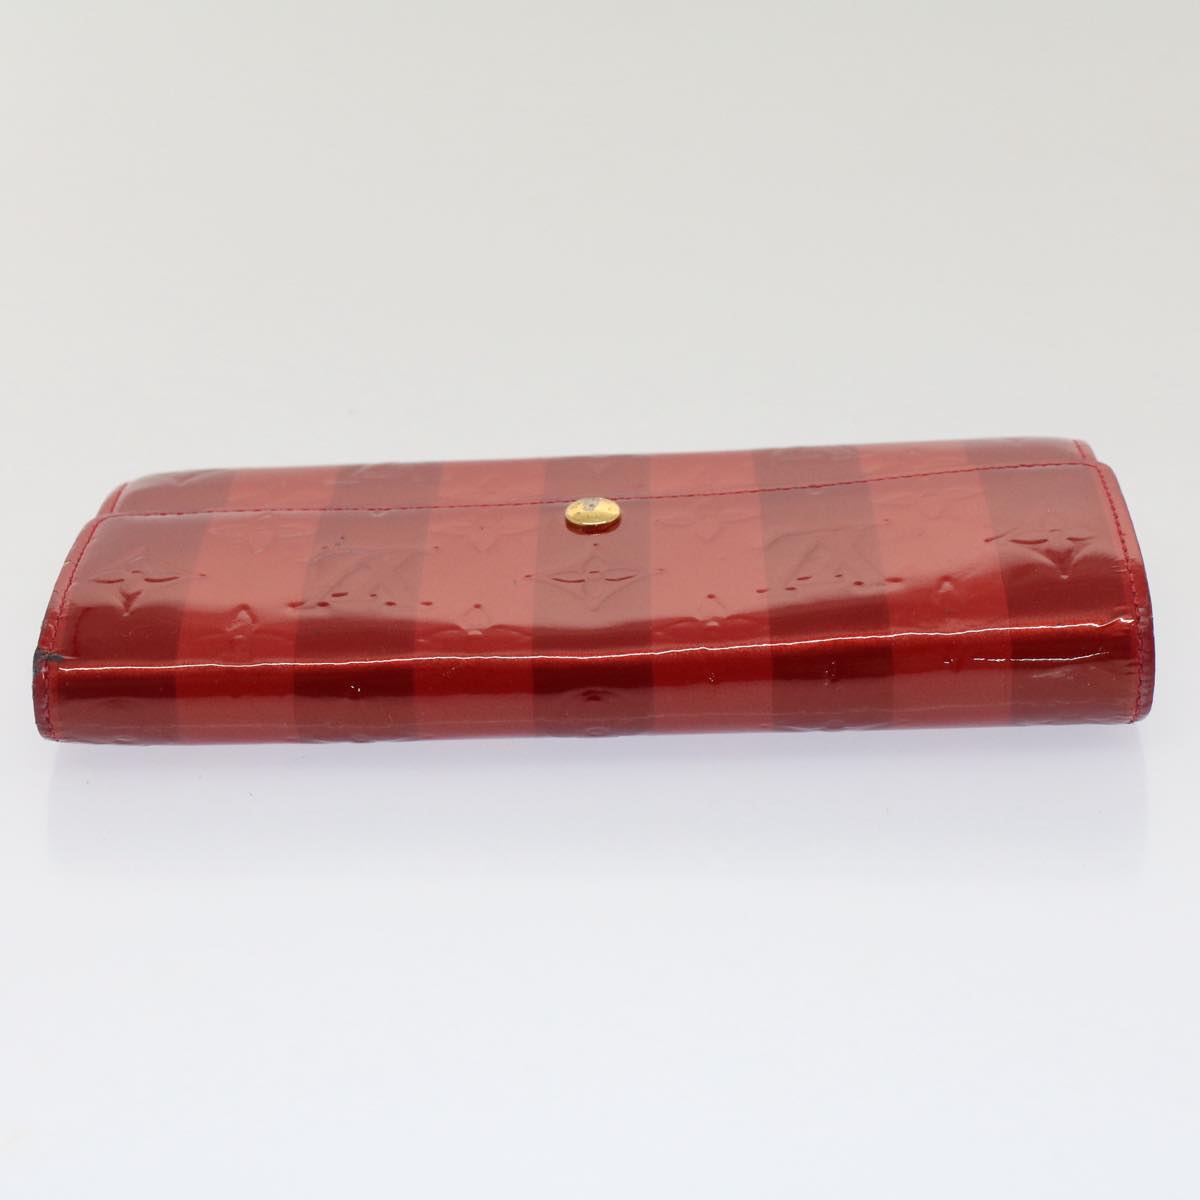 LOUIS VUITTON Vernis Rayure Portefeiulle Sarah Wallet Red M91716 LV Auth 51586